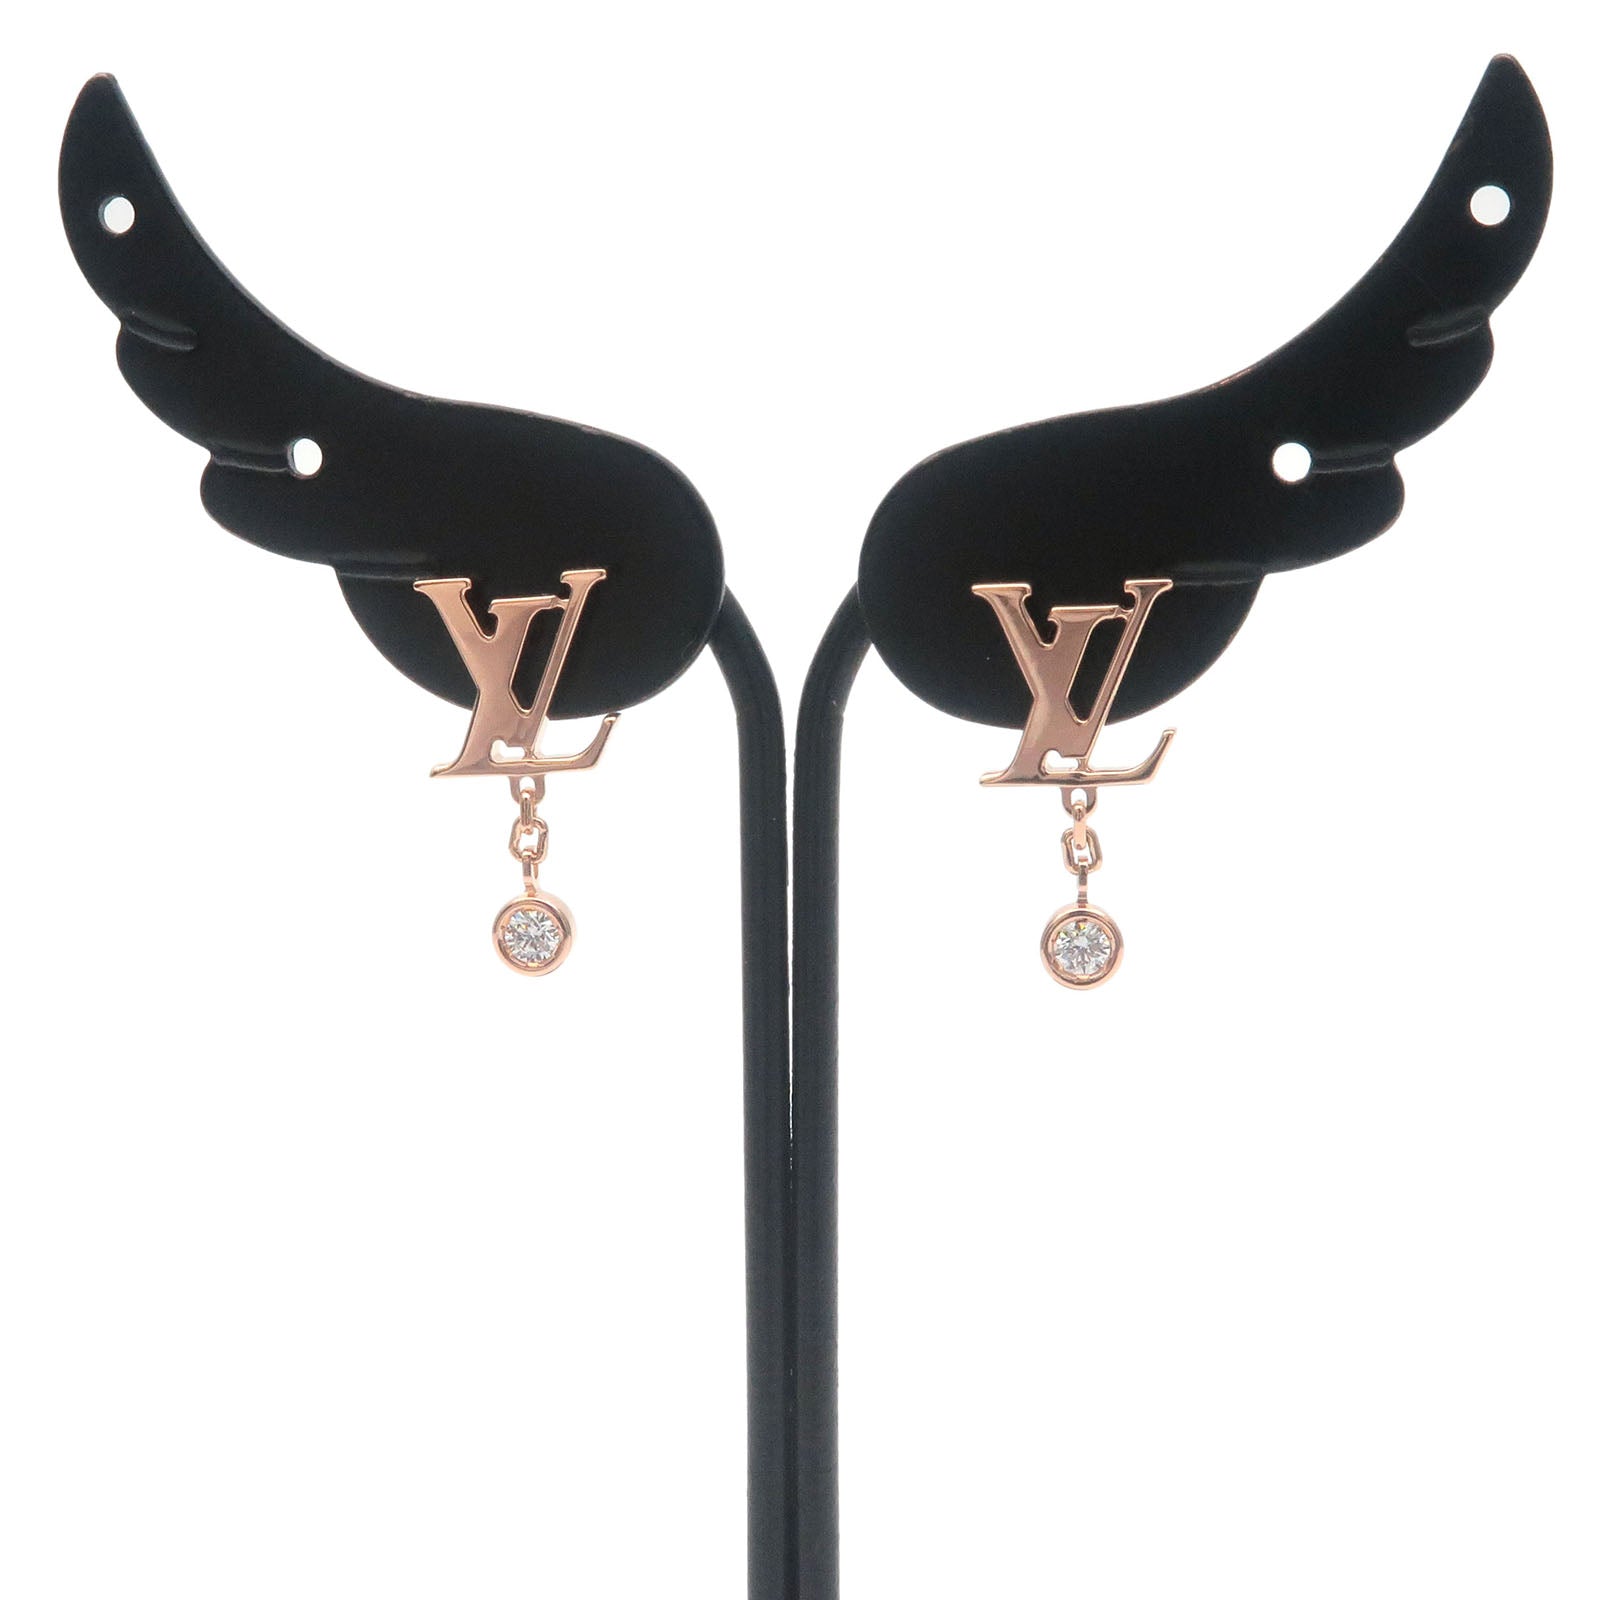 Louis Vuitton Puce Idylle Blossom Earrings Rose Gold Q96549